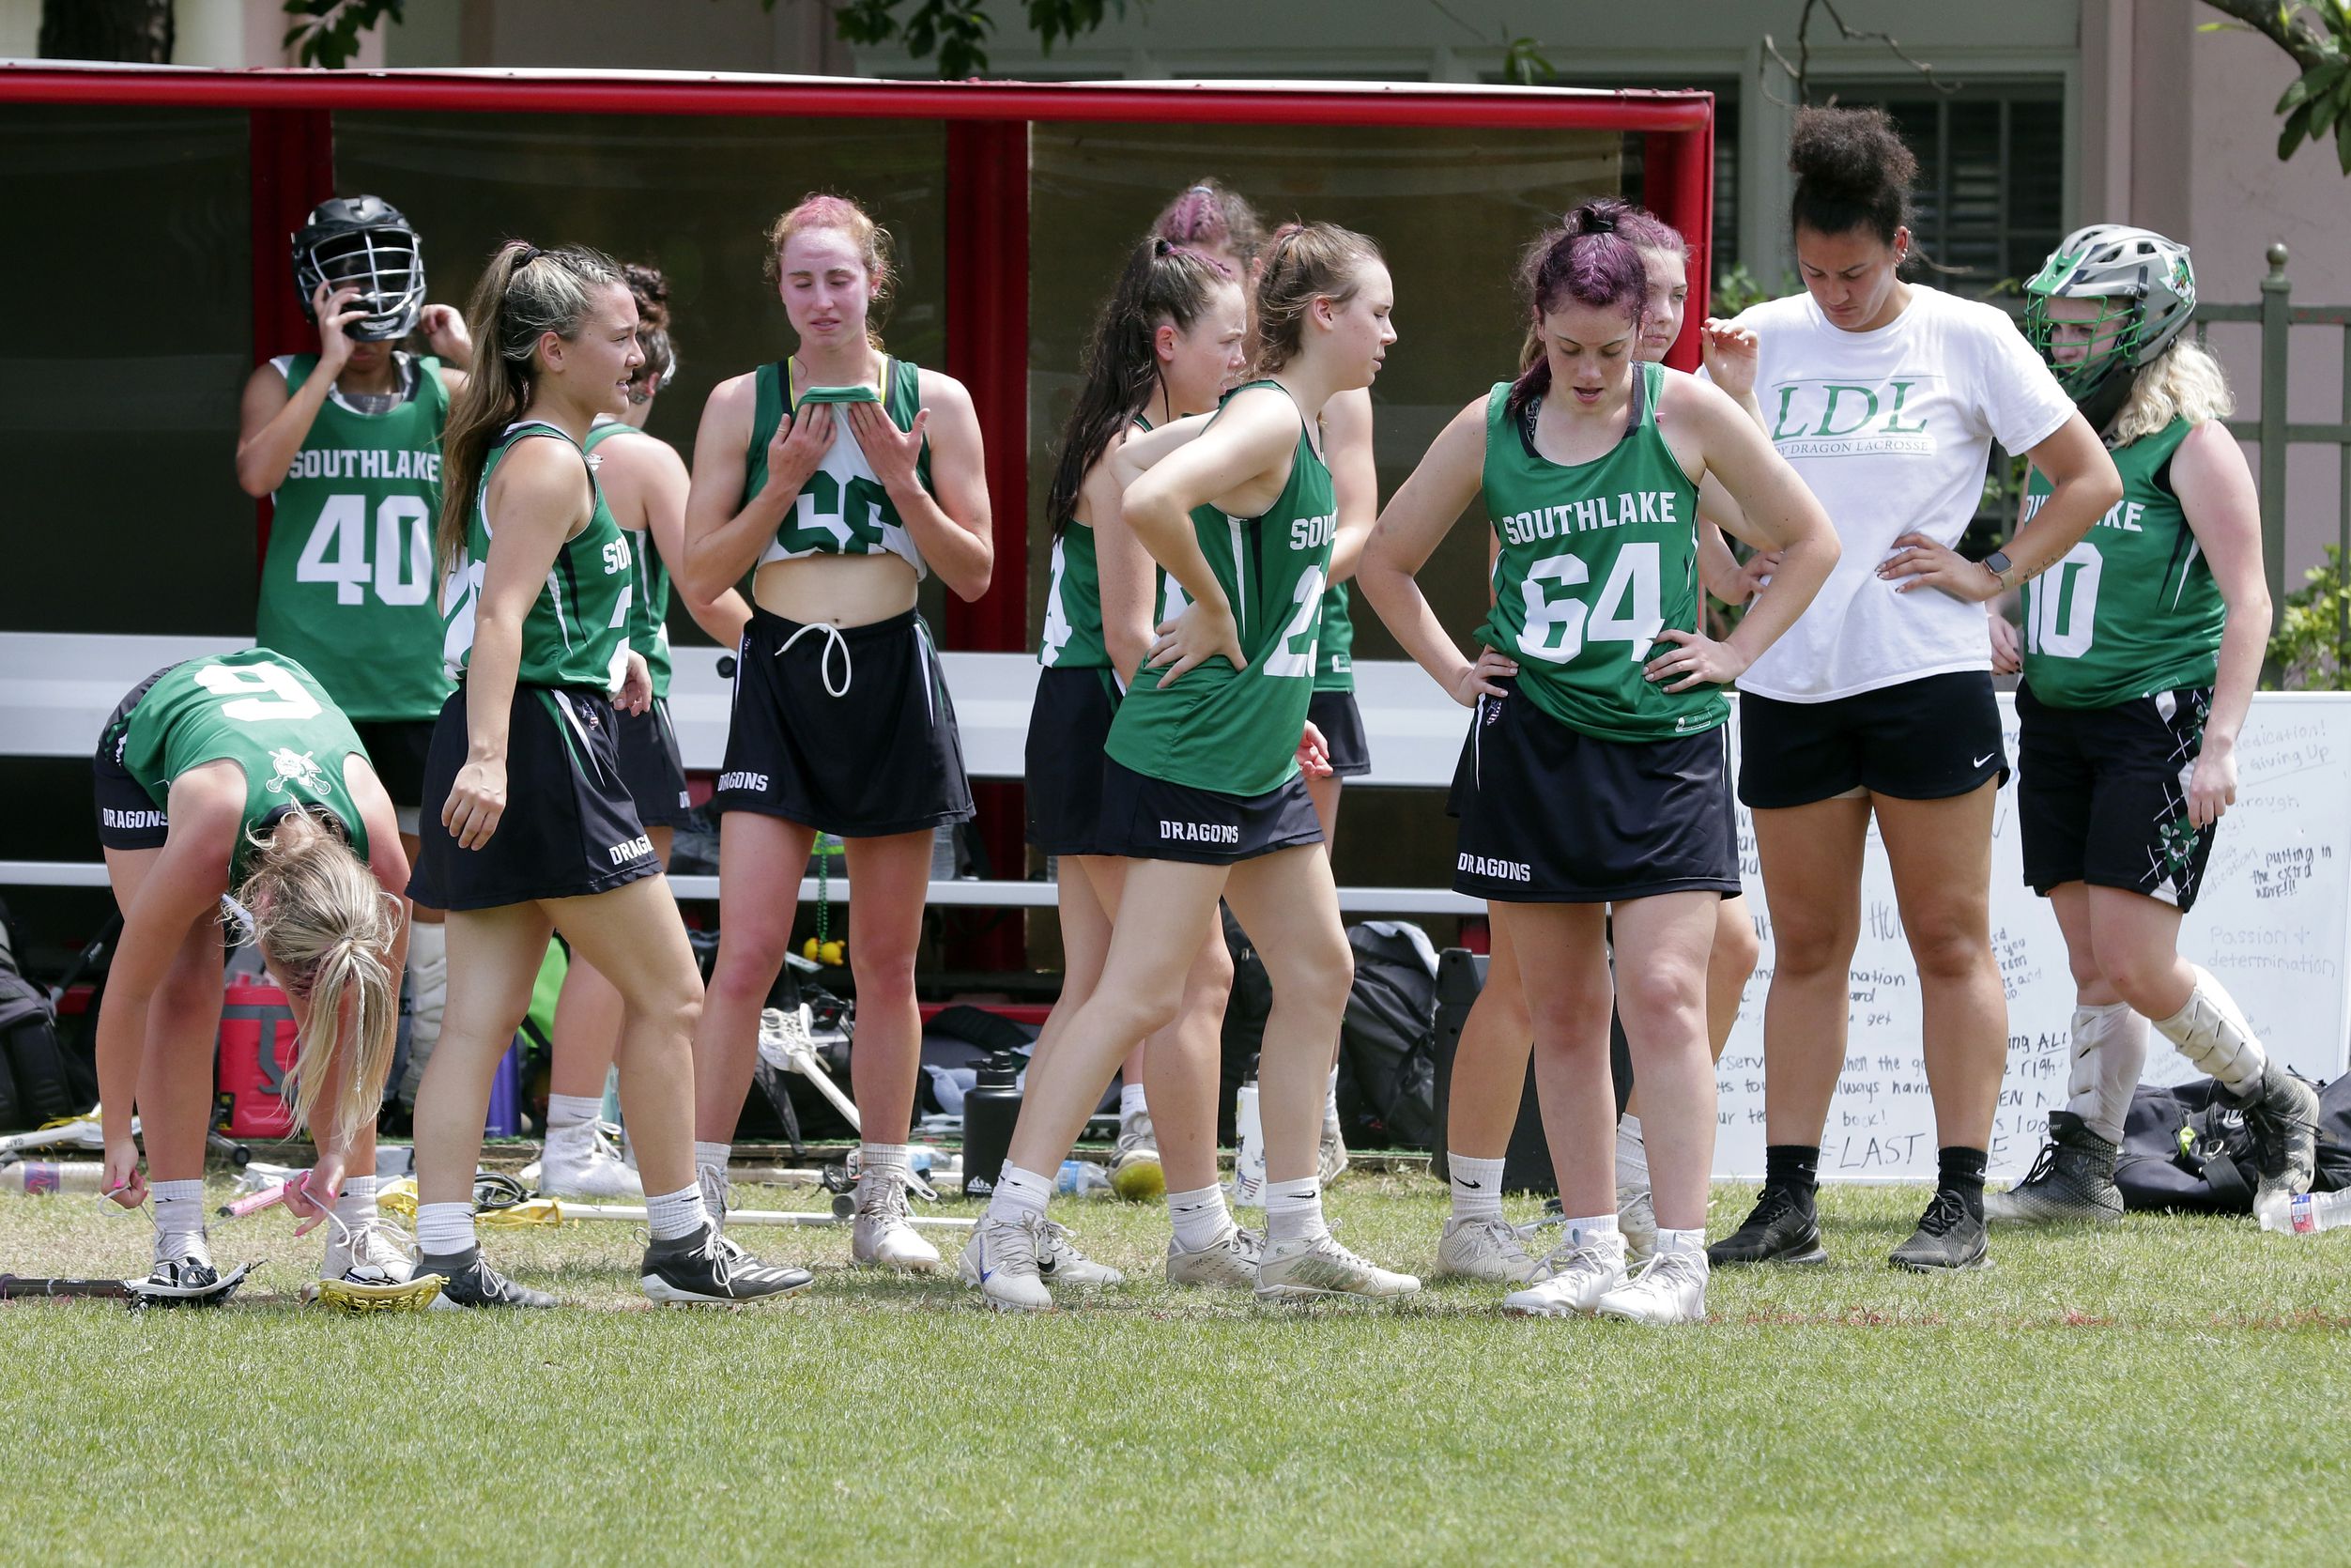 Photos: State champs! Hockaday girls celebrate first lacrosse title in ...